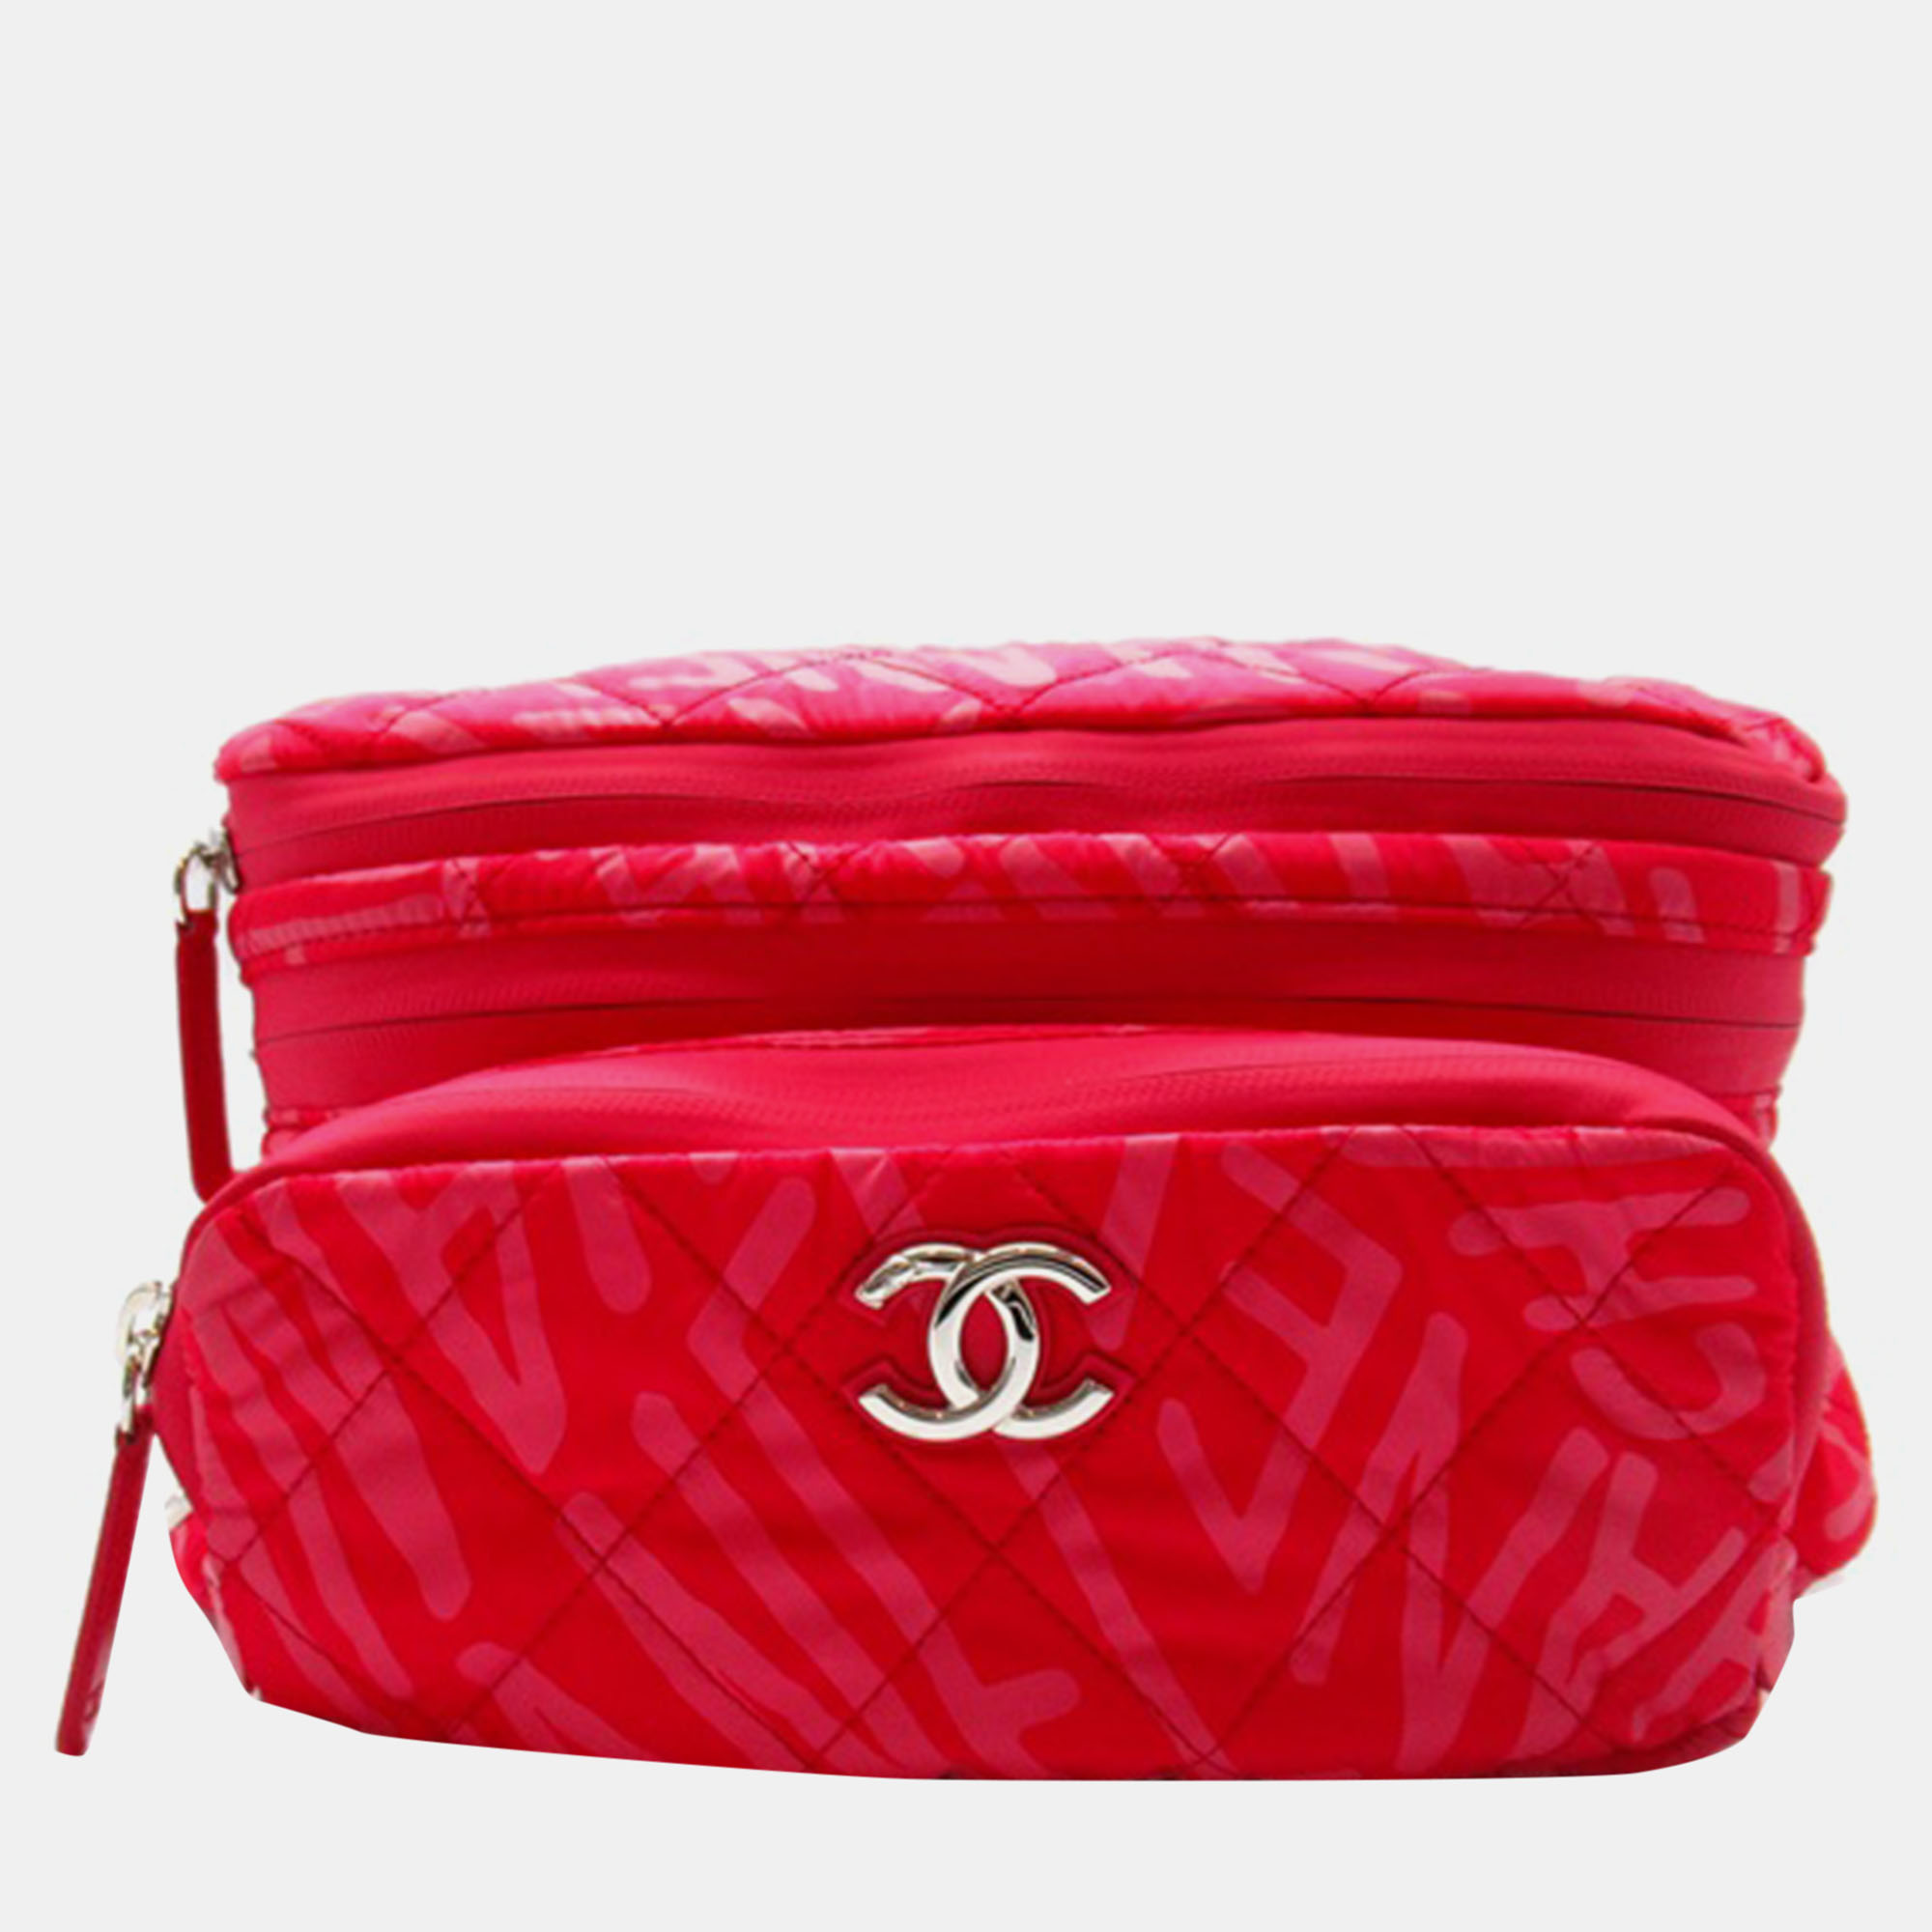 Chanel neon red nylon coco neige convertible backpack